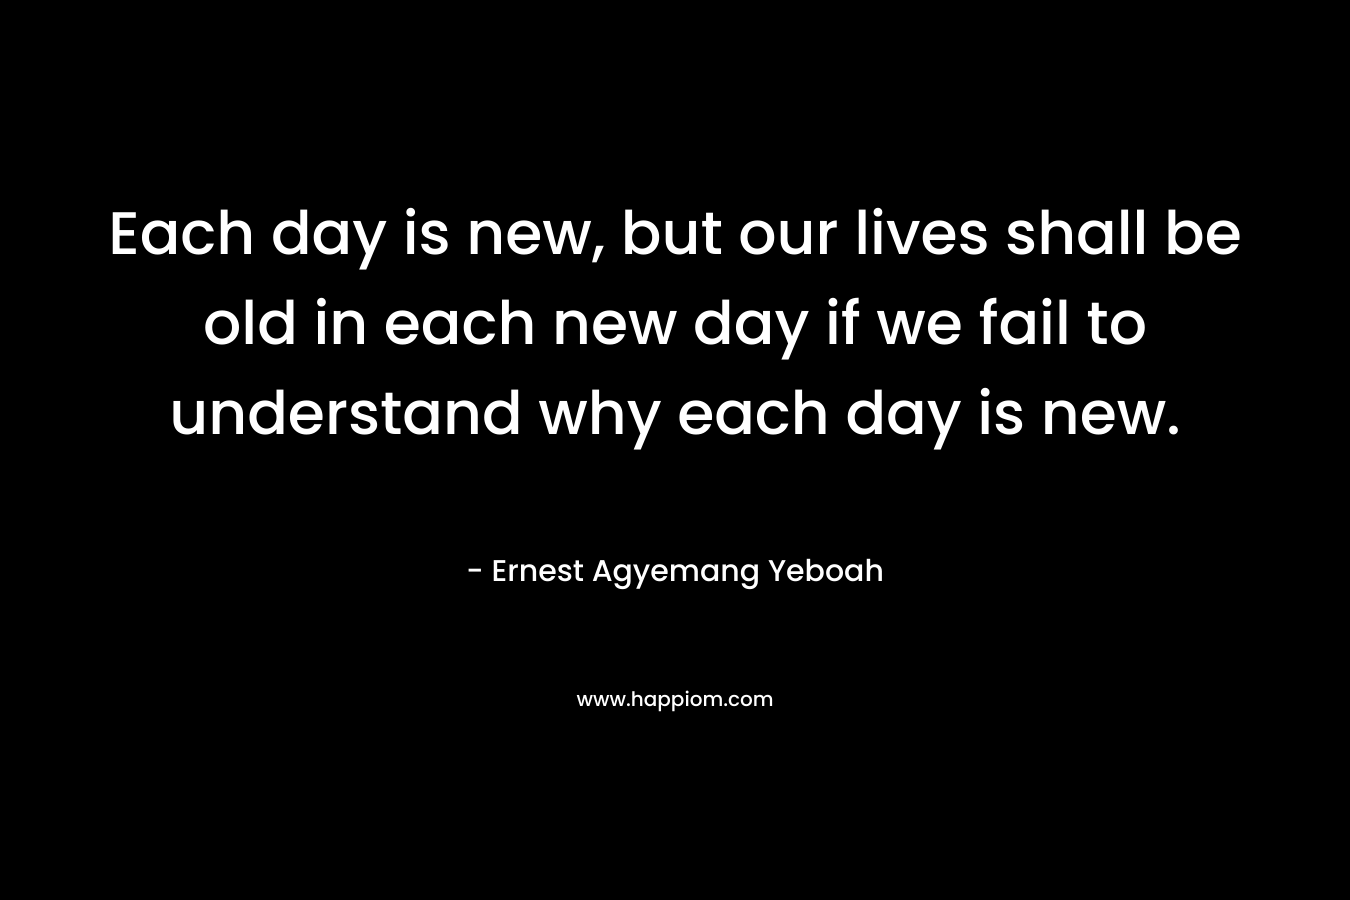 Each day is new, but our lives shall be old in each new day if we fail to understand why each day is new. – Ernest Agyemang Yeboah